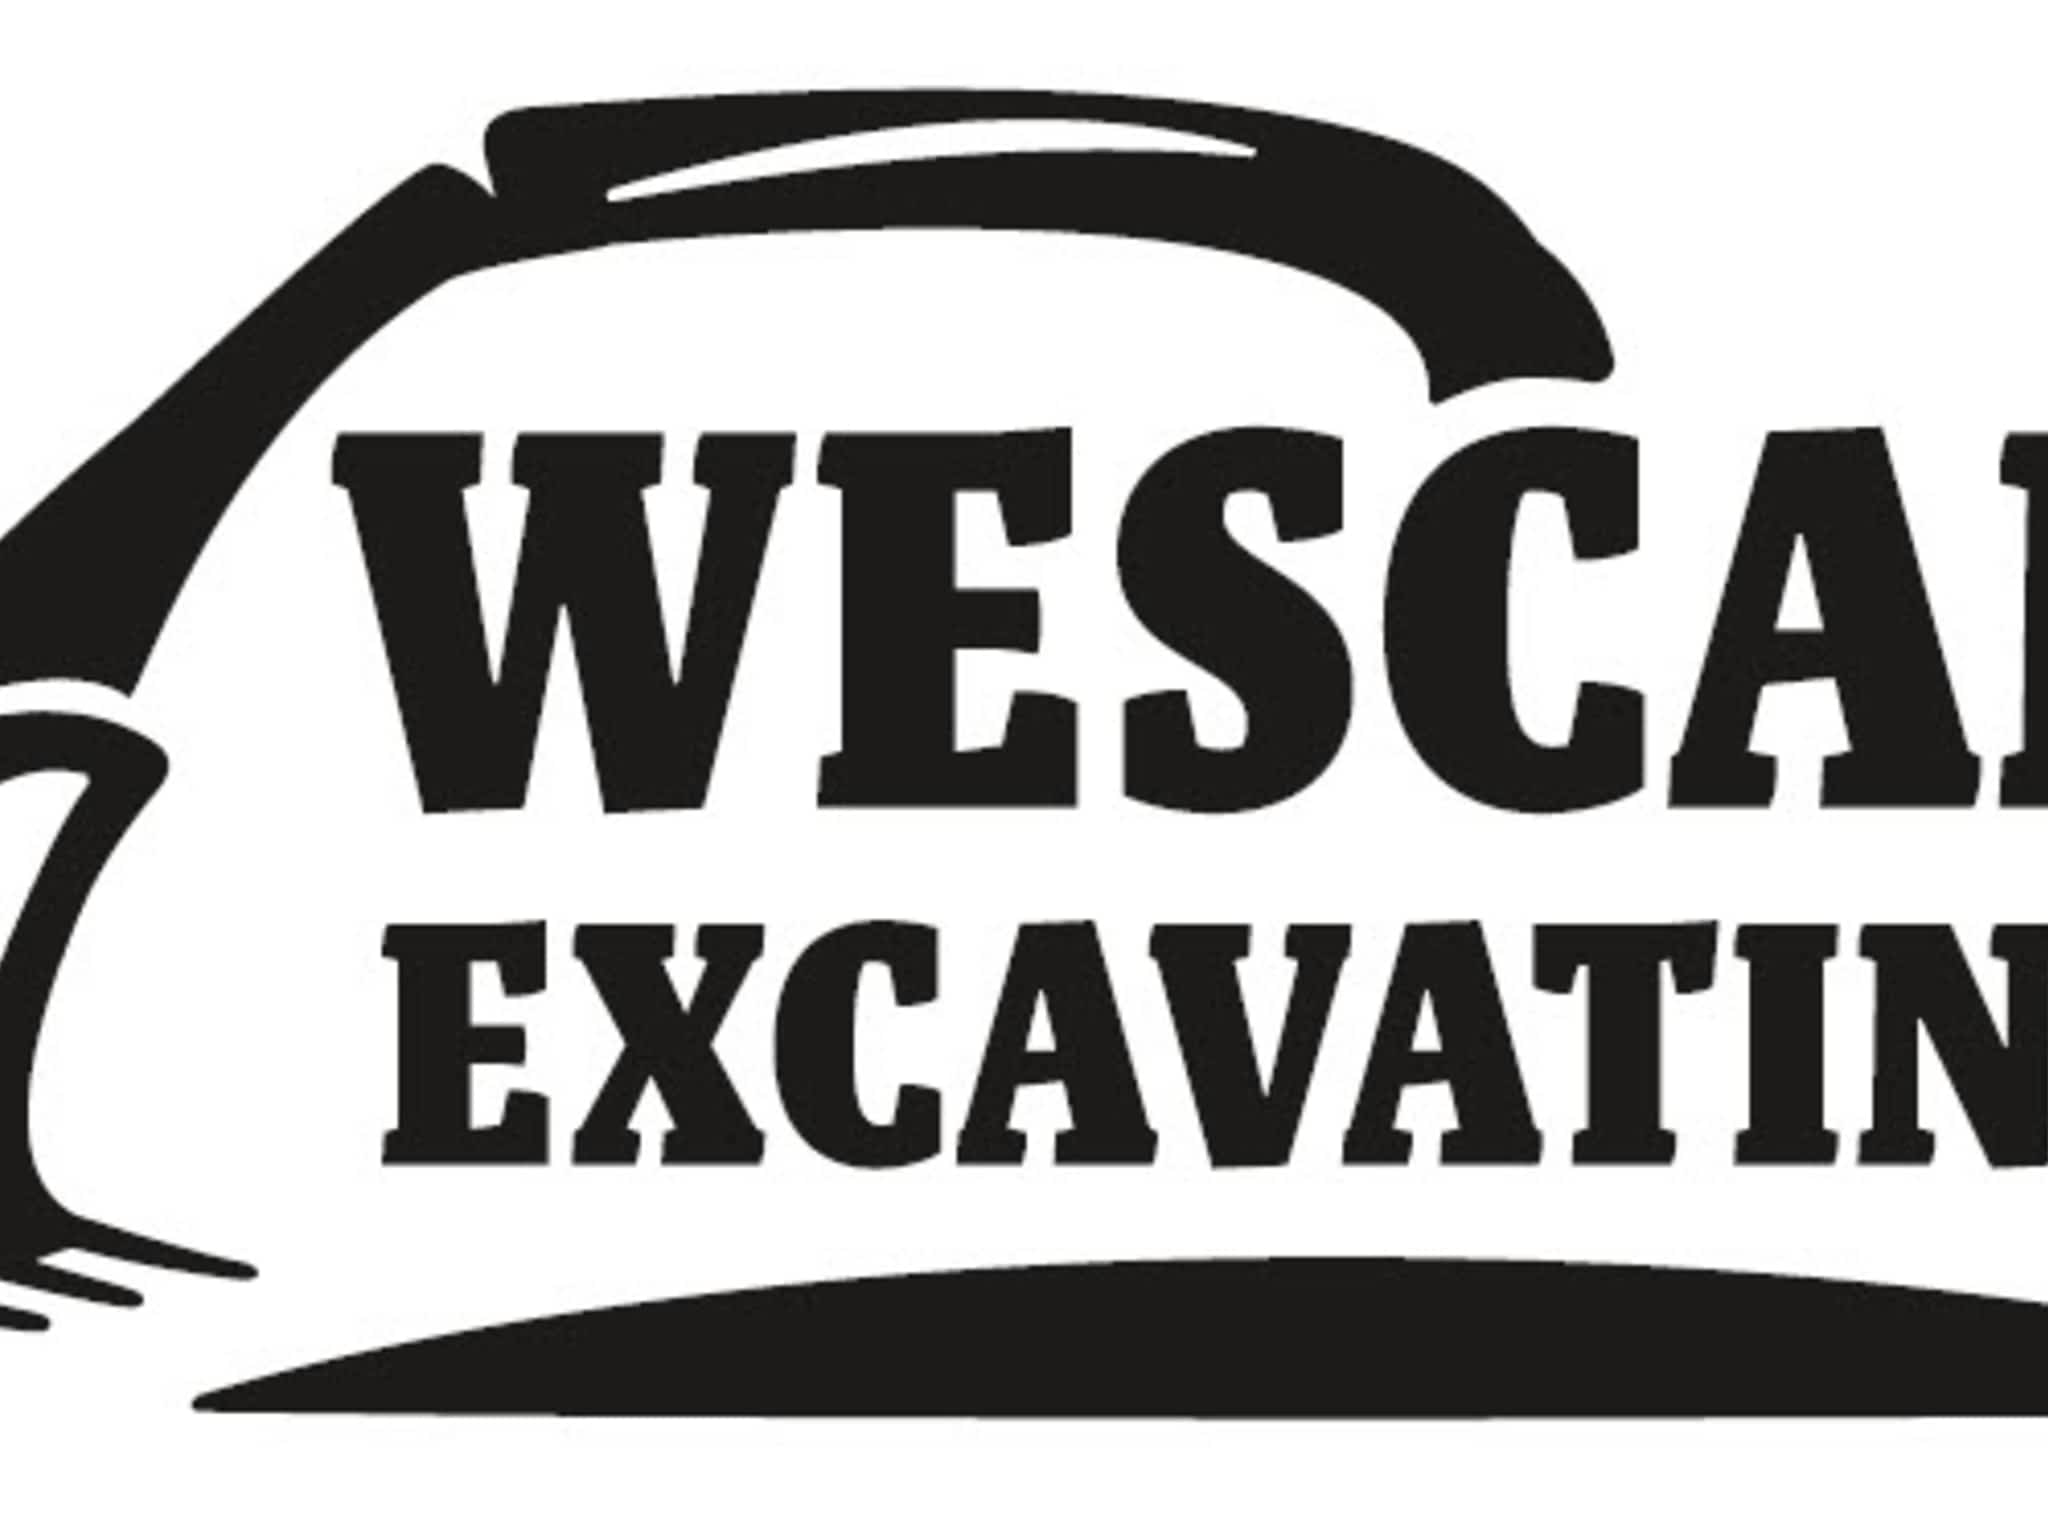 photo Wescan Services Limited